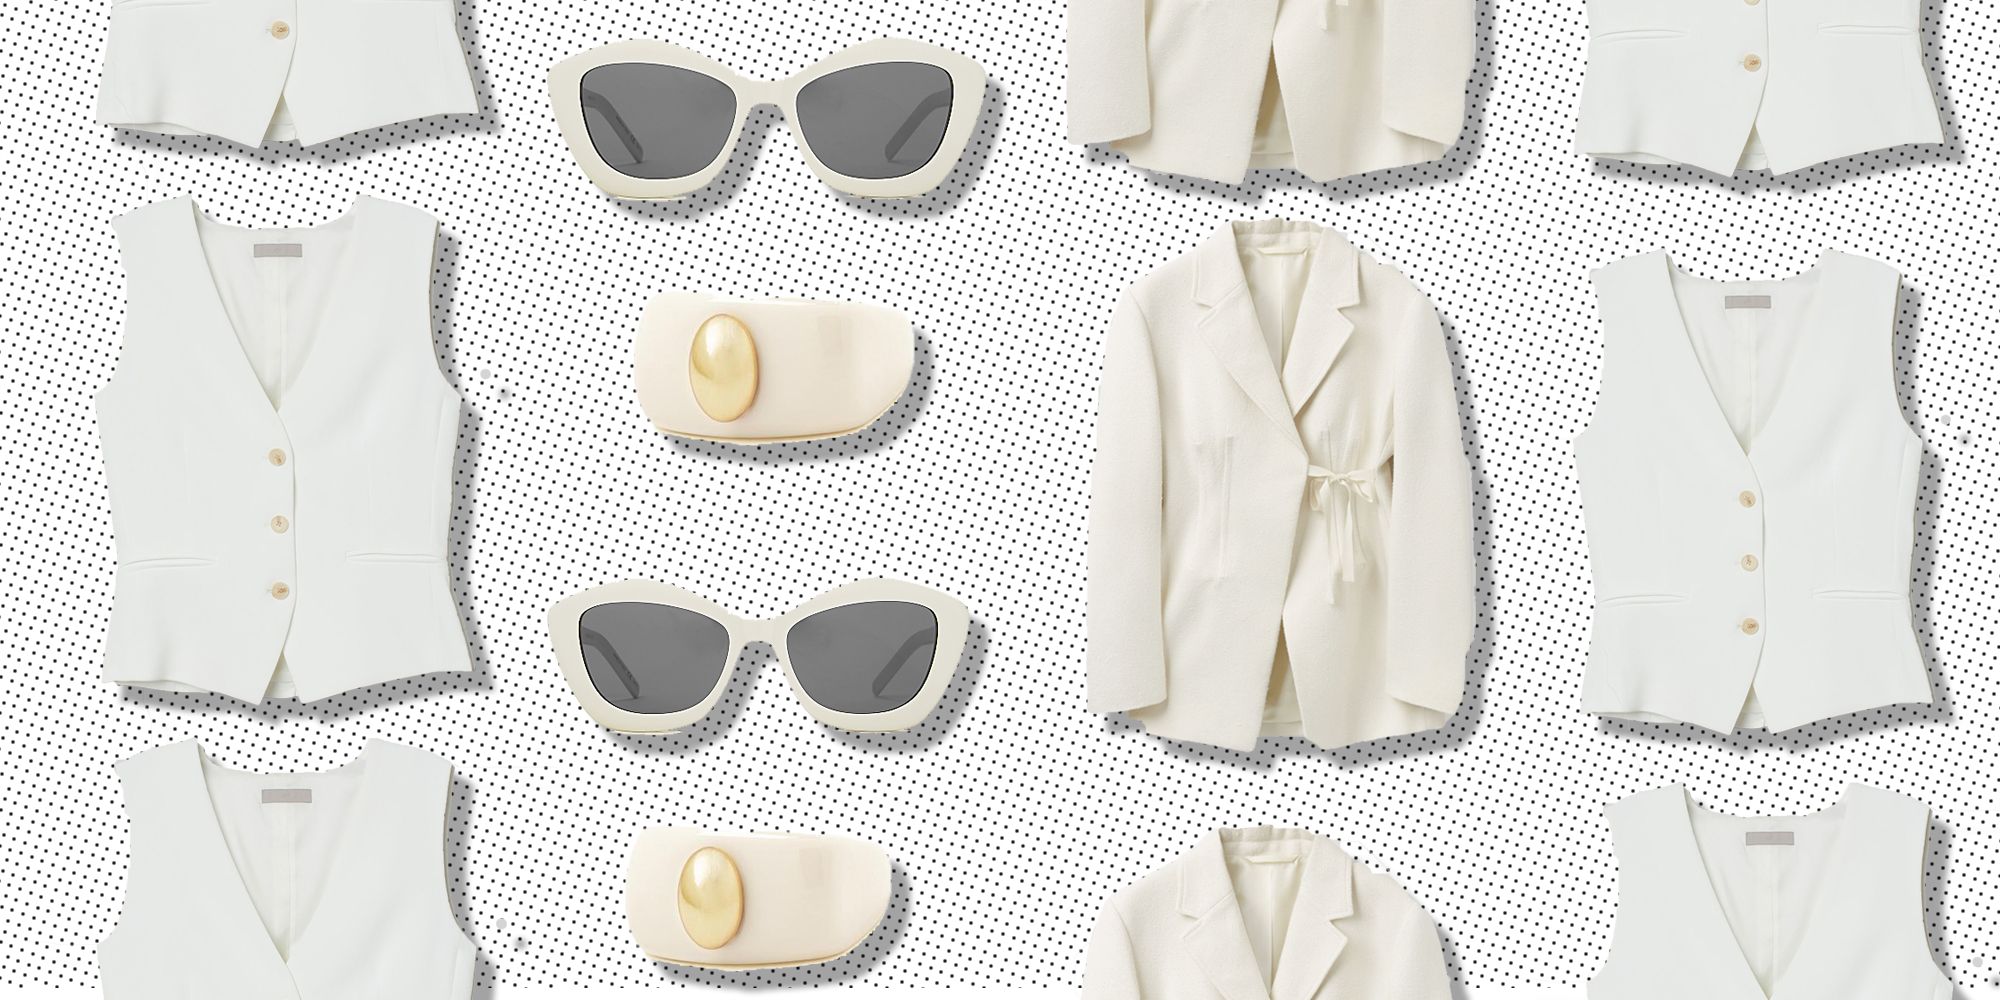 How to wear white this summer, what goes with it and can I wear it